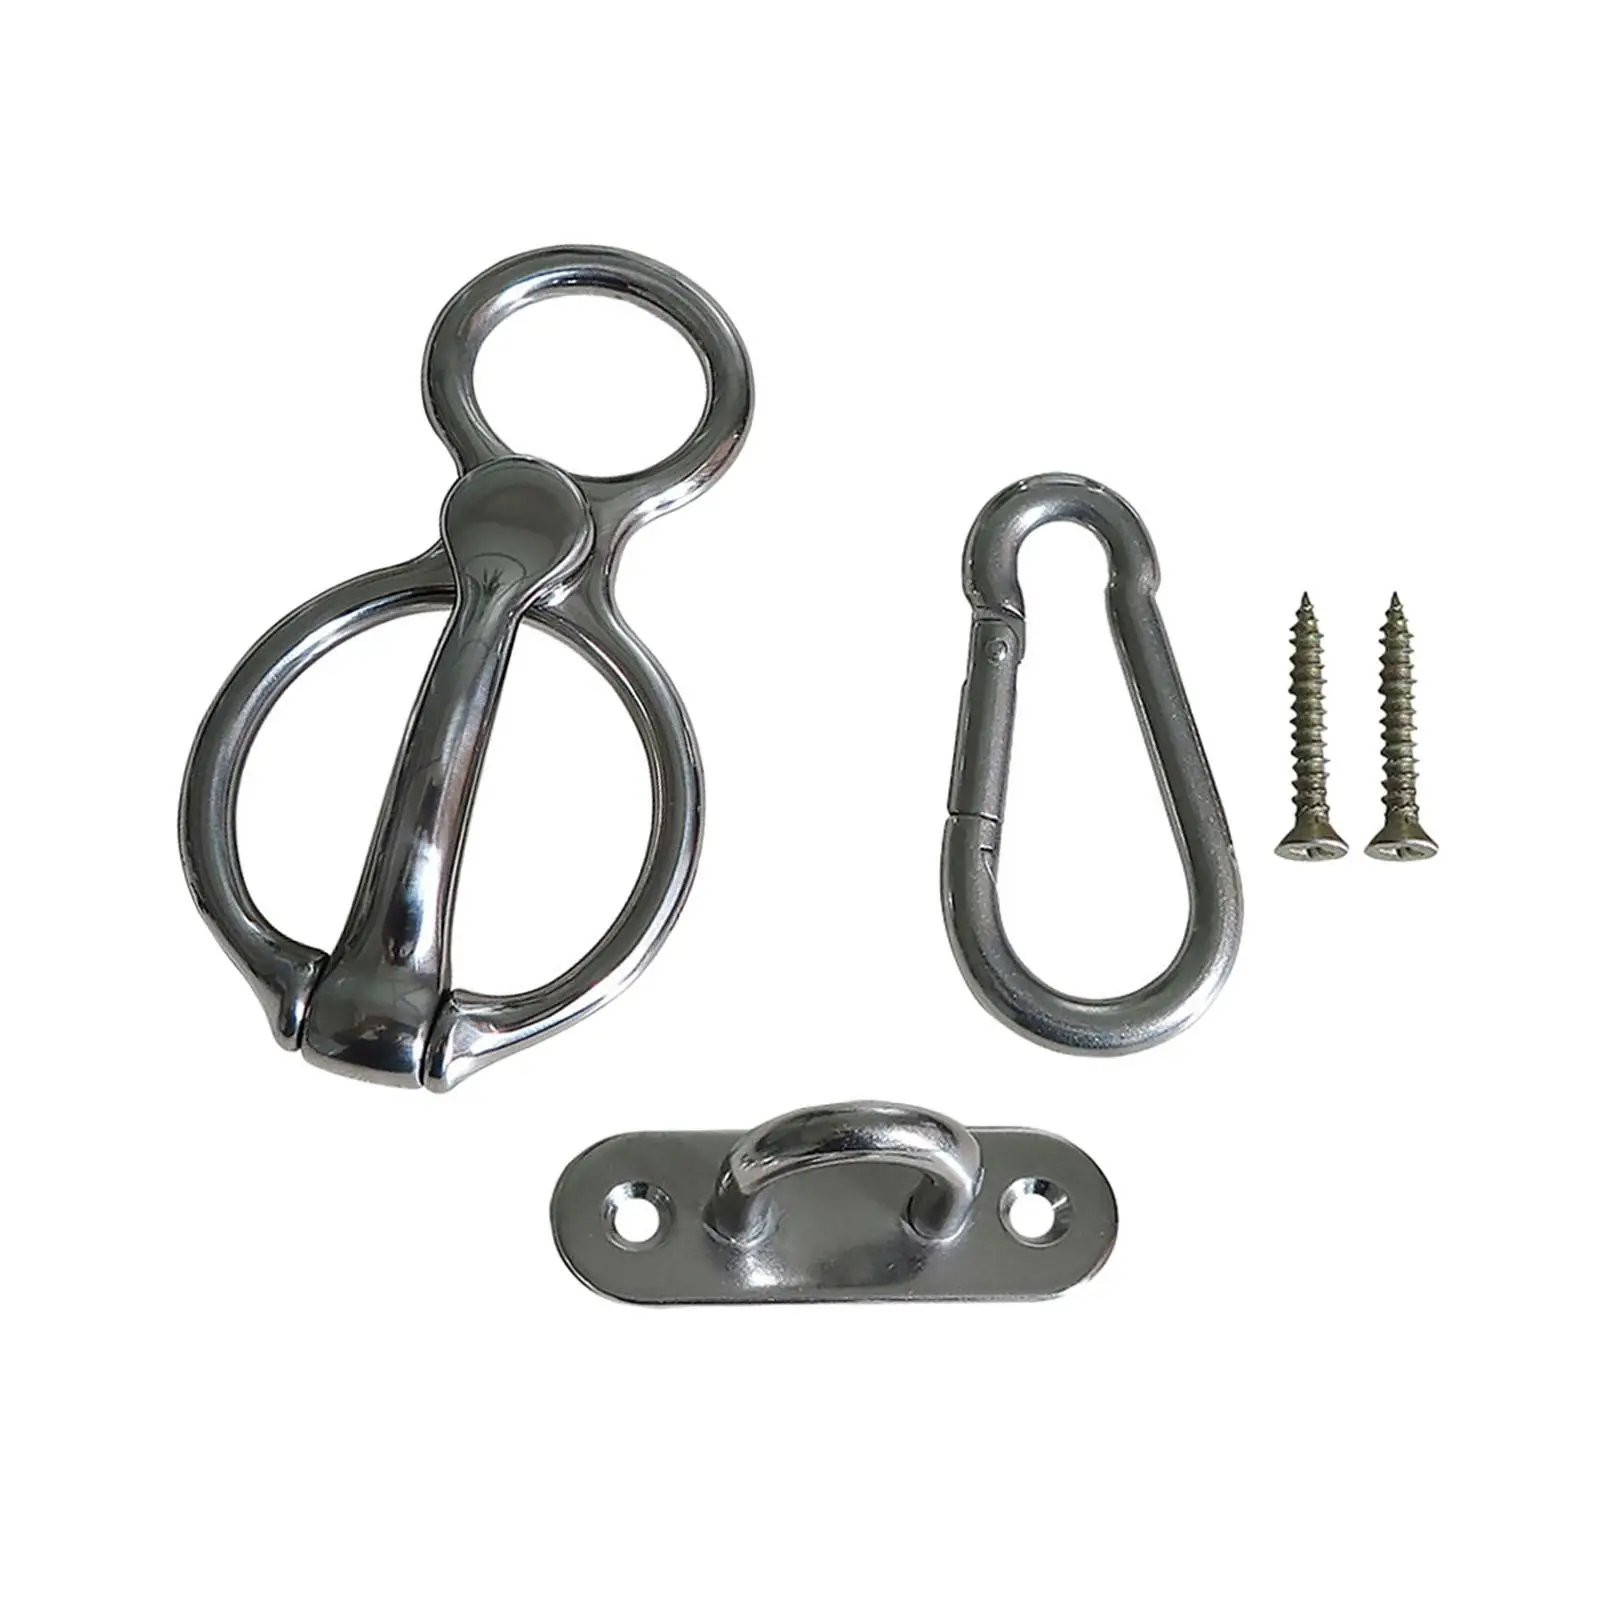 Horse Tie Ring Fasteners Equestrian Hooks Livestock Tie Off with Eye Bolt Outdoor Sports Durable Quick Snap Stable Accessories